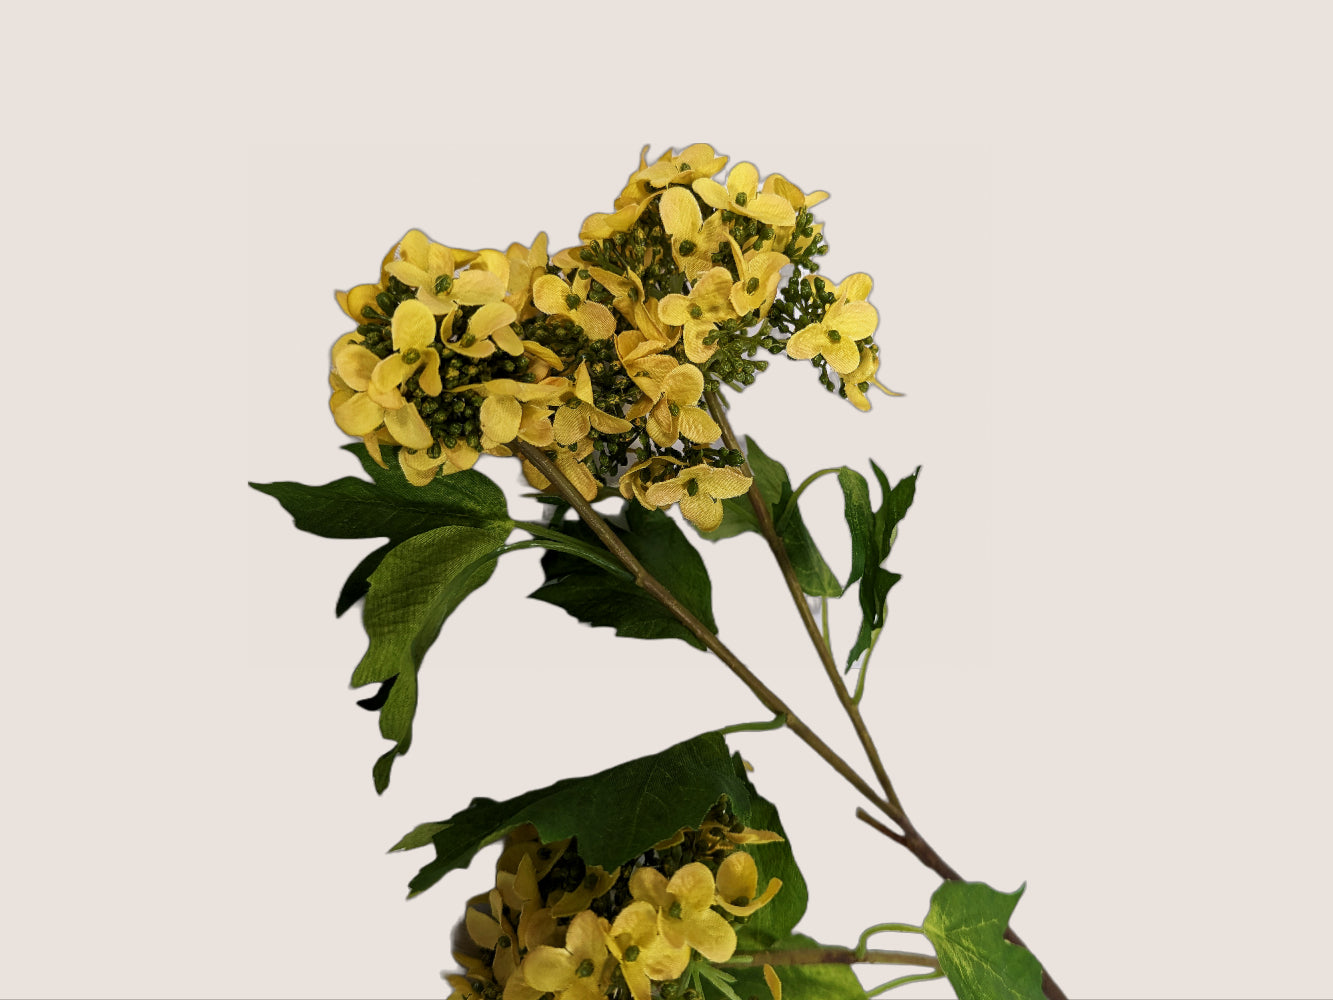 Artificial yellow snowball hydrangea stem with three realistic blooms in small, medium, and large sizes. The stem is 13 inches tall and the blooms and branches extend to 11 inches, making the total height 24 inches. The petals are yellow and the stem has a lifelike brown gradient. The image is against a neutral beige background.